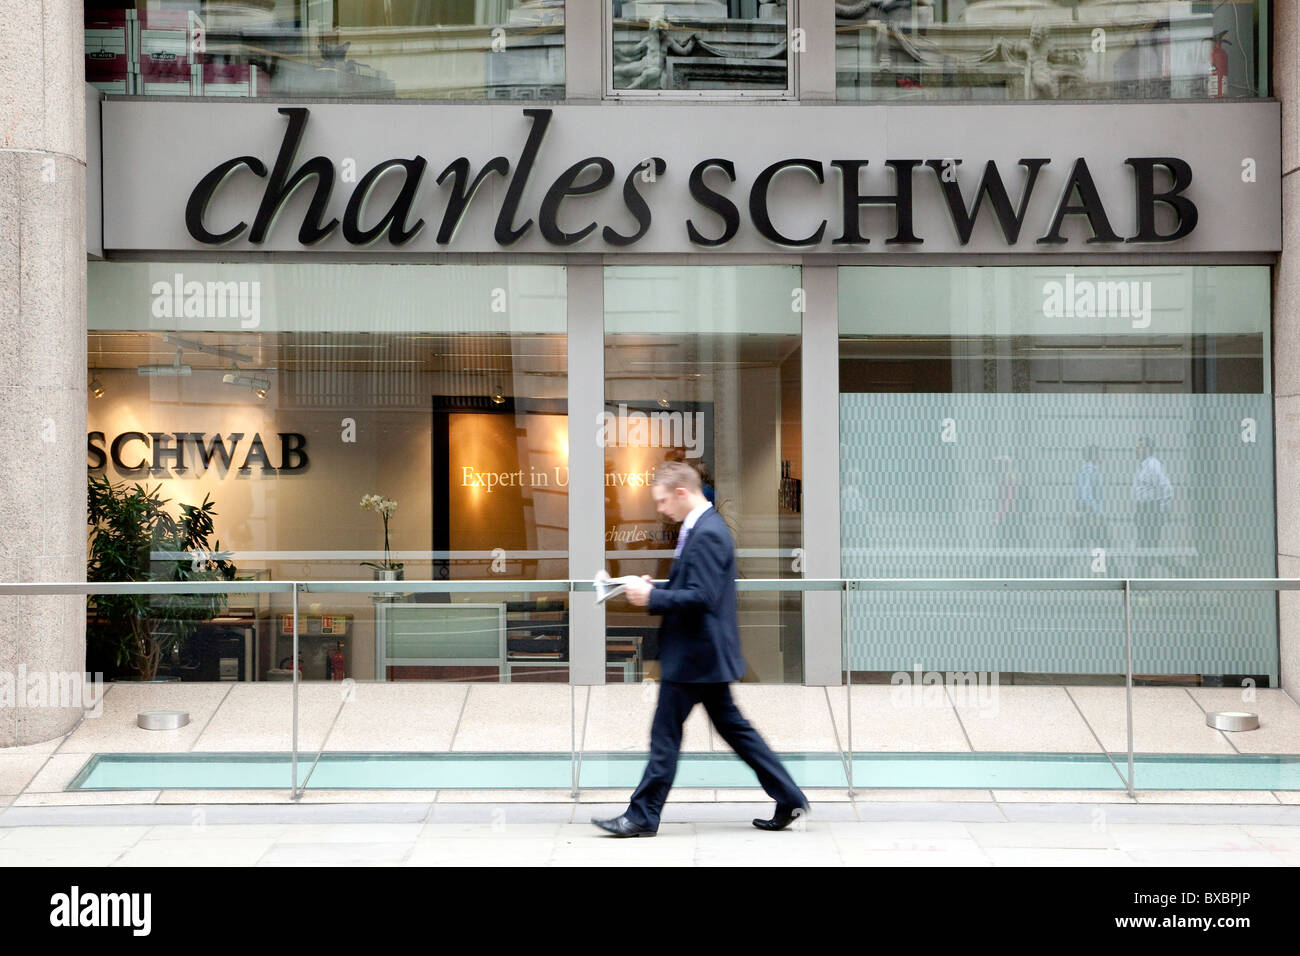 Store of the financial services and real estate agent Charles Schwab in London, England, United Kingdom, Europe Stock Photo